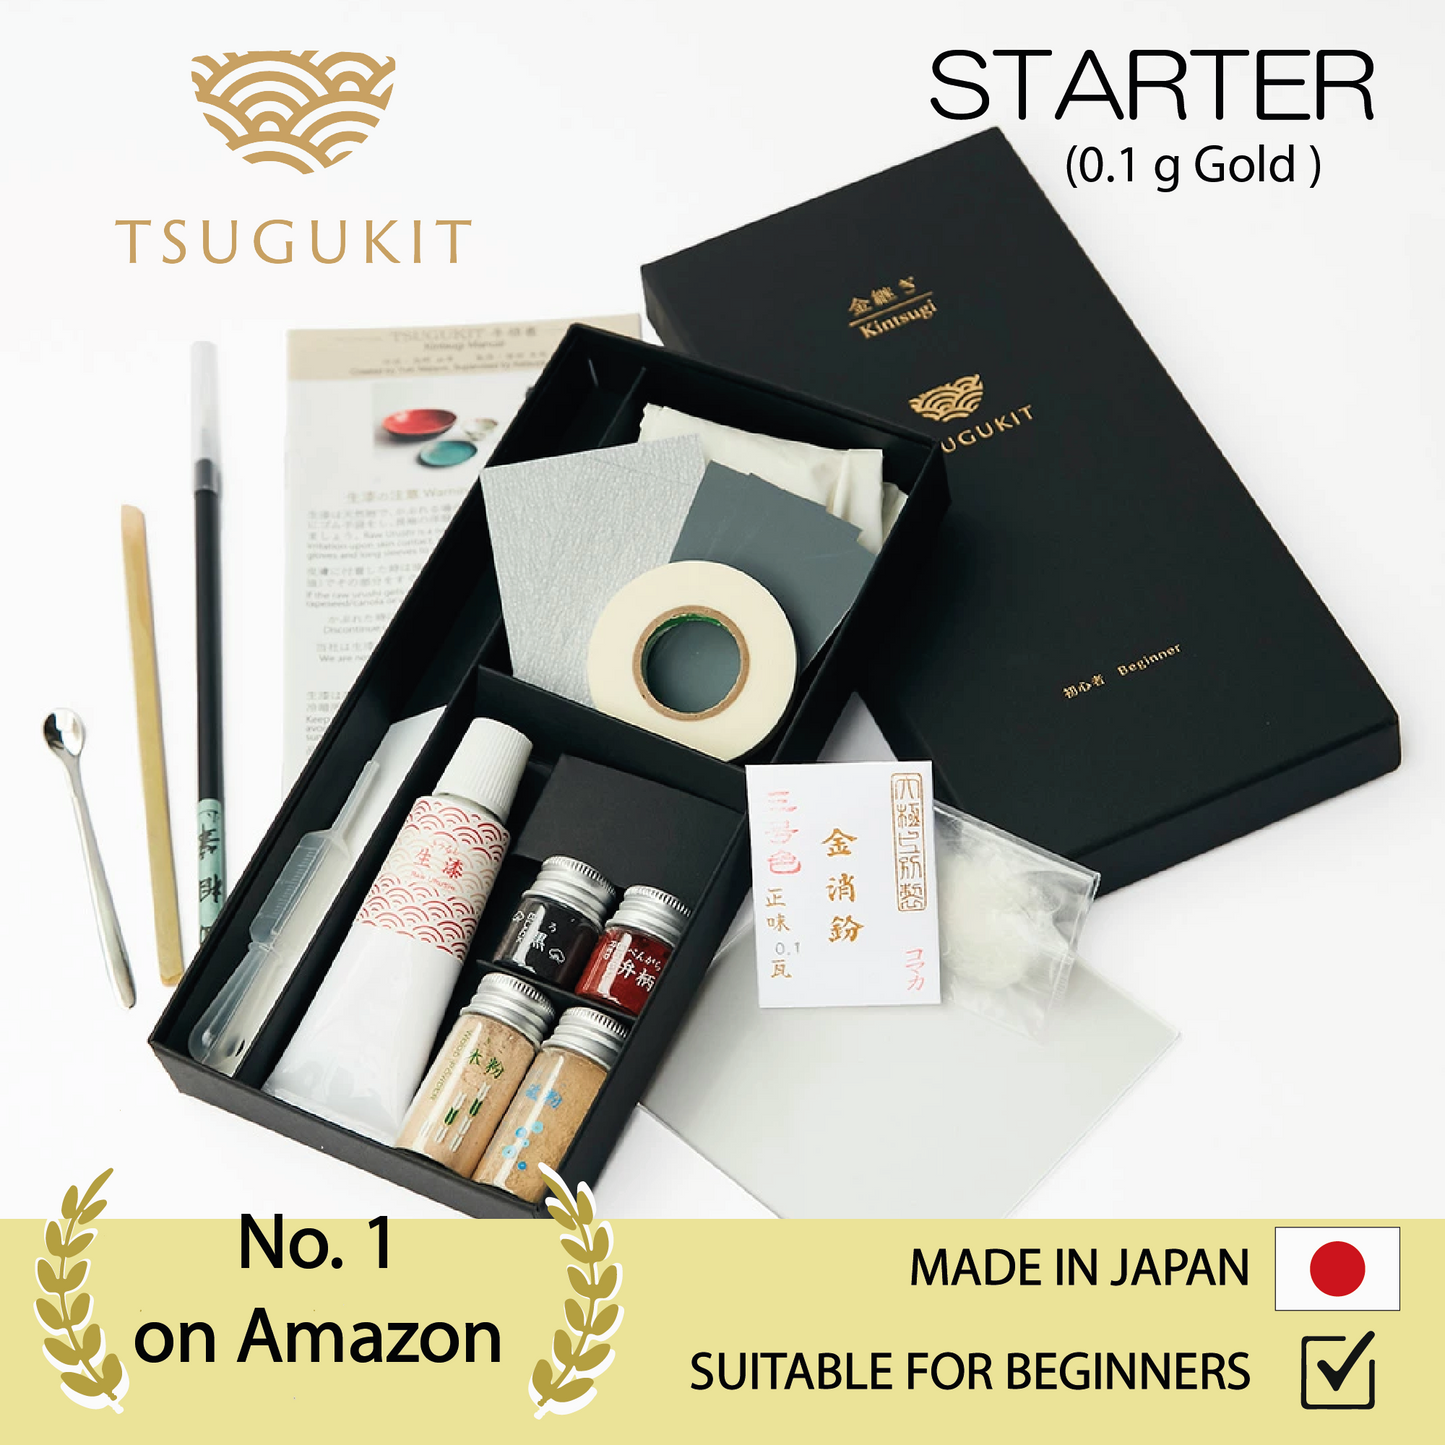 Food safe Kintsugi repair kit - Starter TSUGUKIT - (Traditional Japanese urushi lacquer and 0.1 g of Genuine 23 kt Gold Powder included)